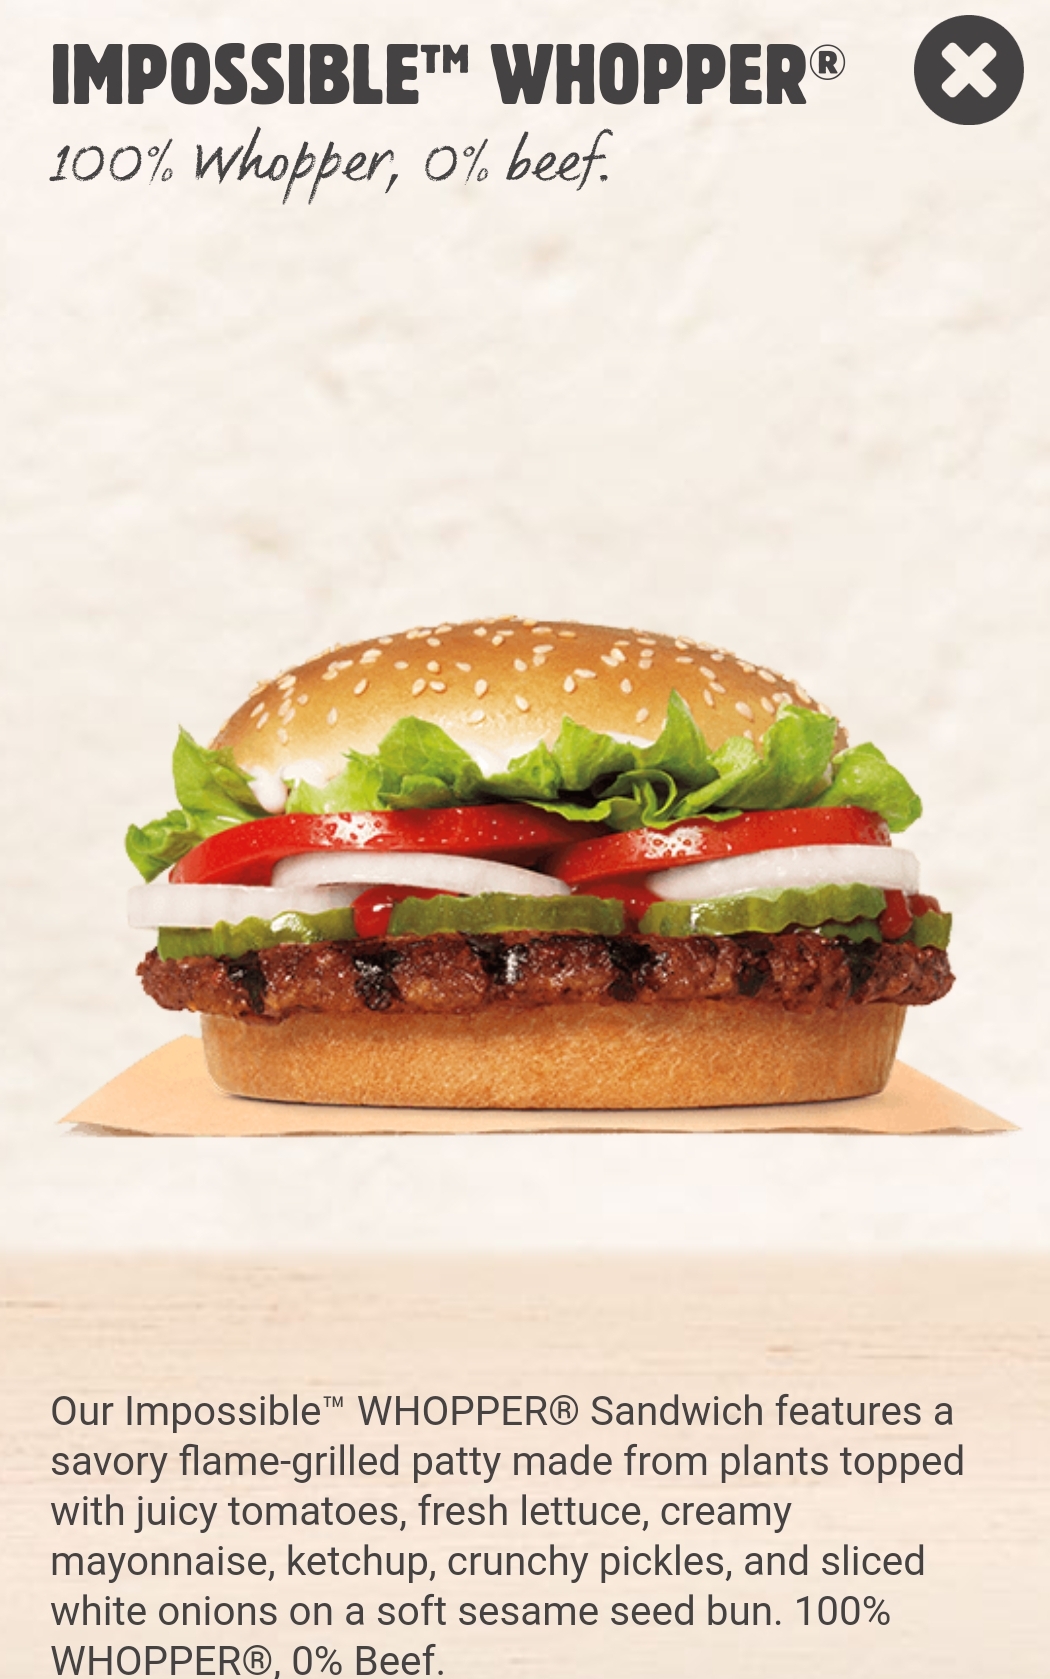 Is the Impossible Whopper vegan?